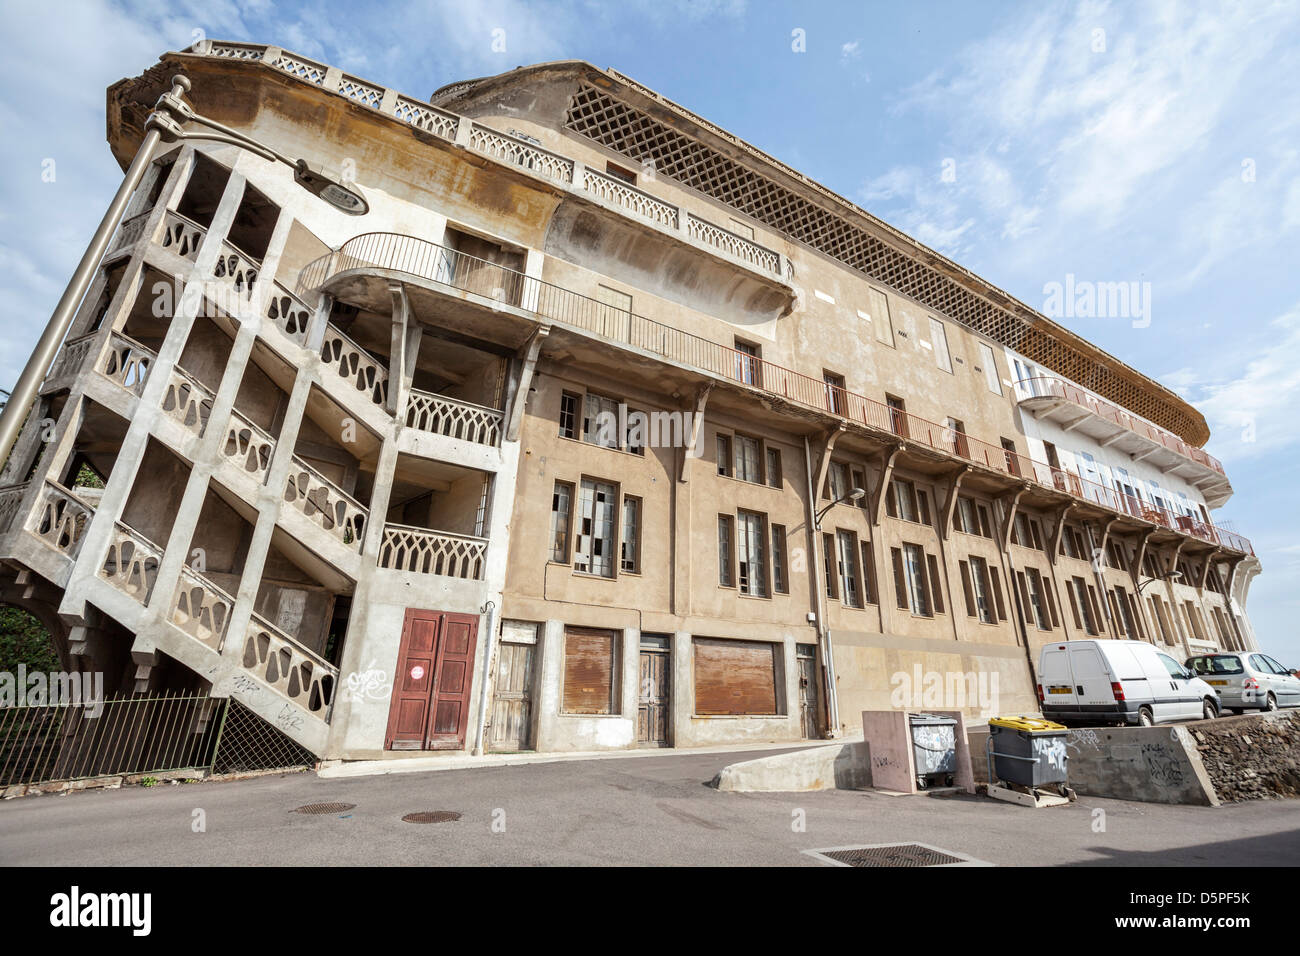 Hotel Belvedere du Rayon Vert in Cerbere,Languedoc-Roussillon,France. Stock Photo